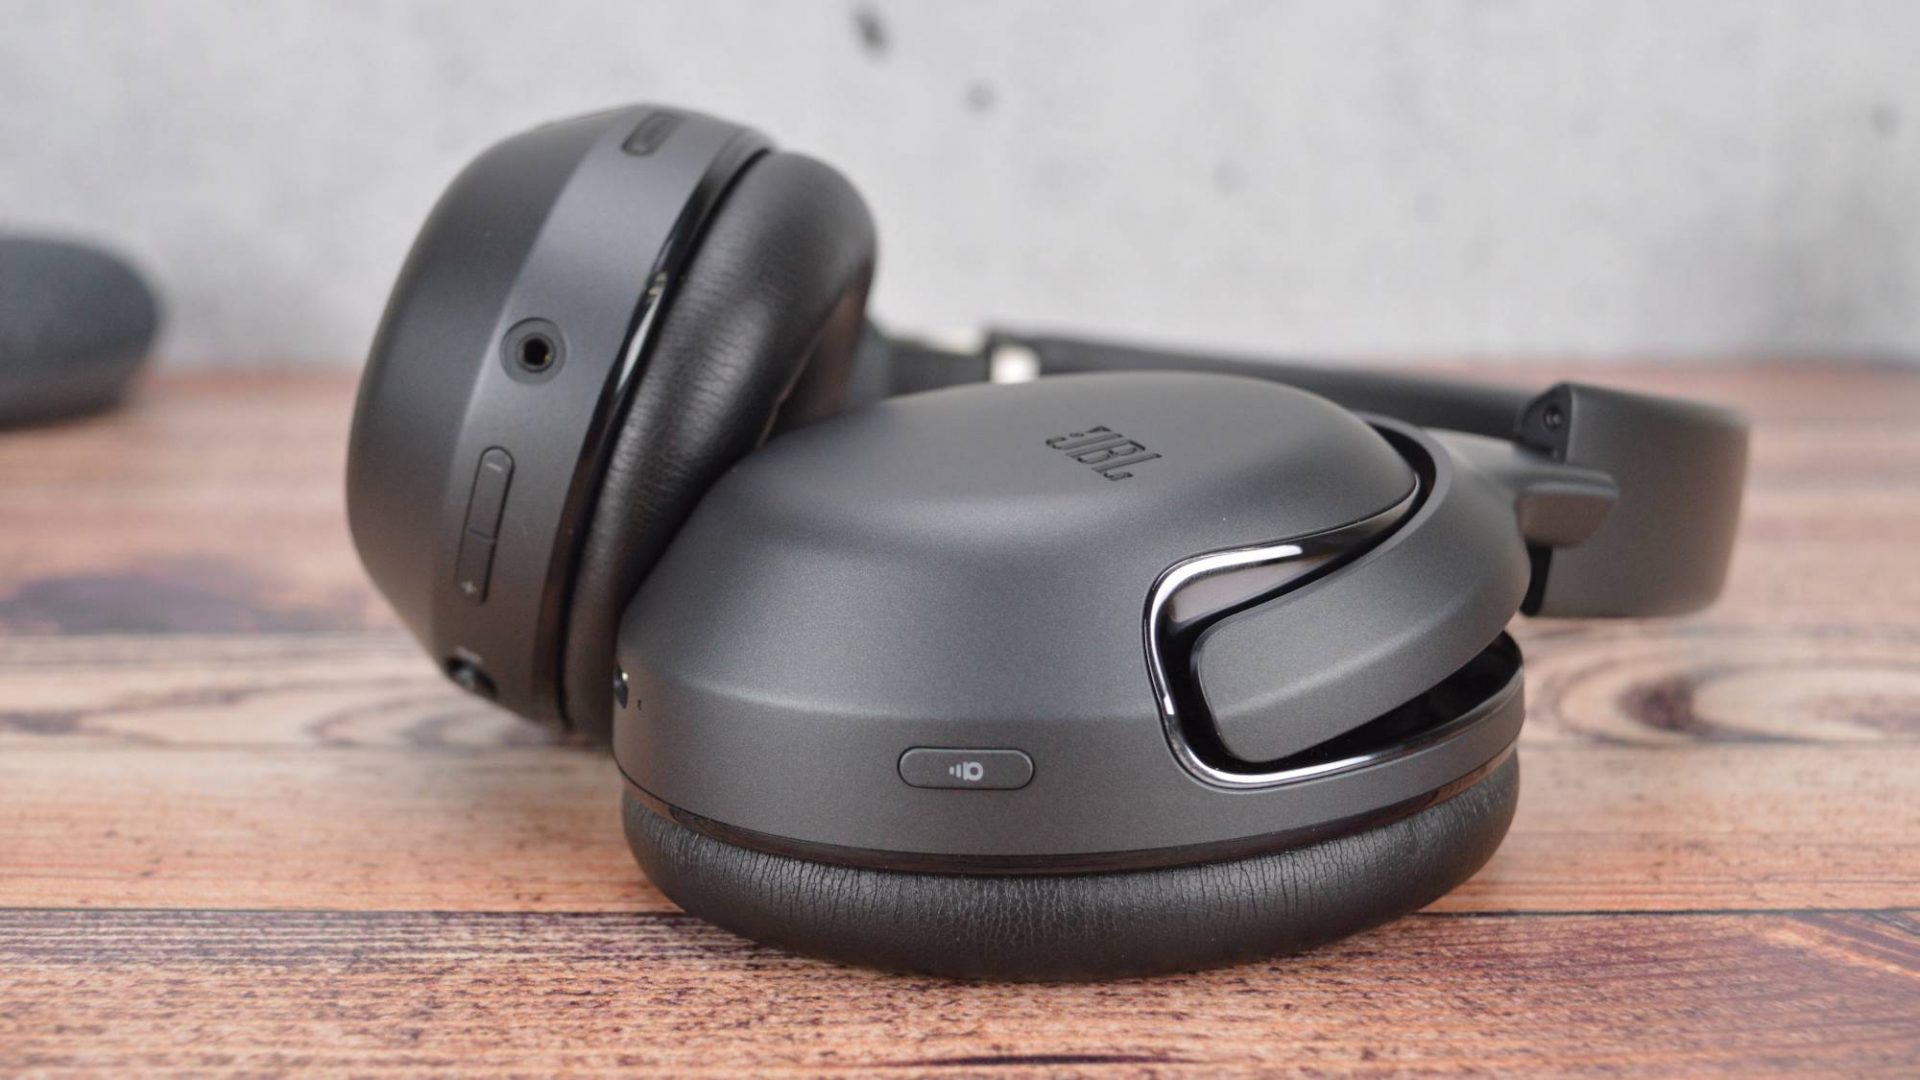 JBL Tour One noise-canceling headphones overview: Competing with Sony